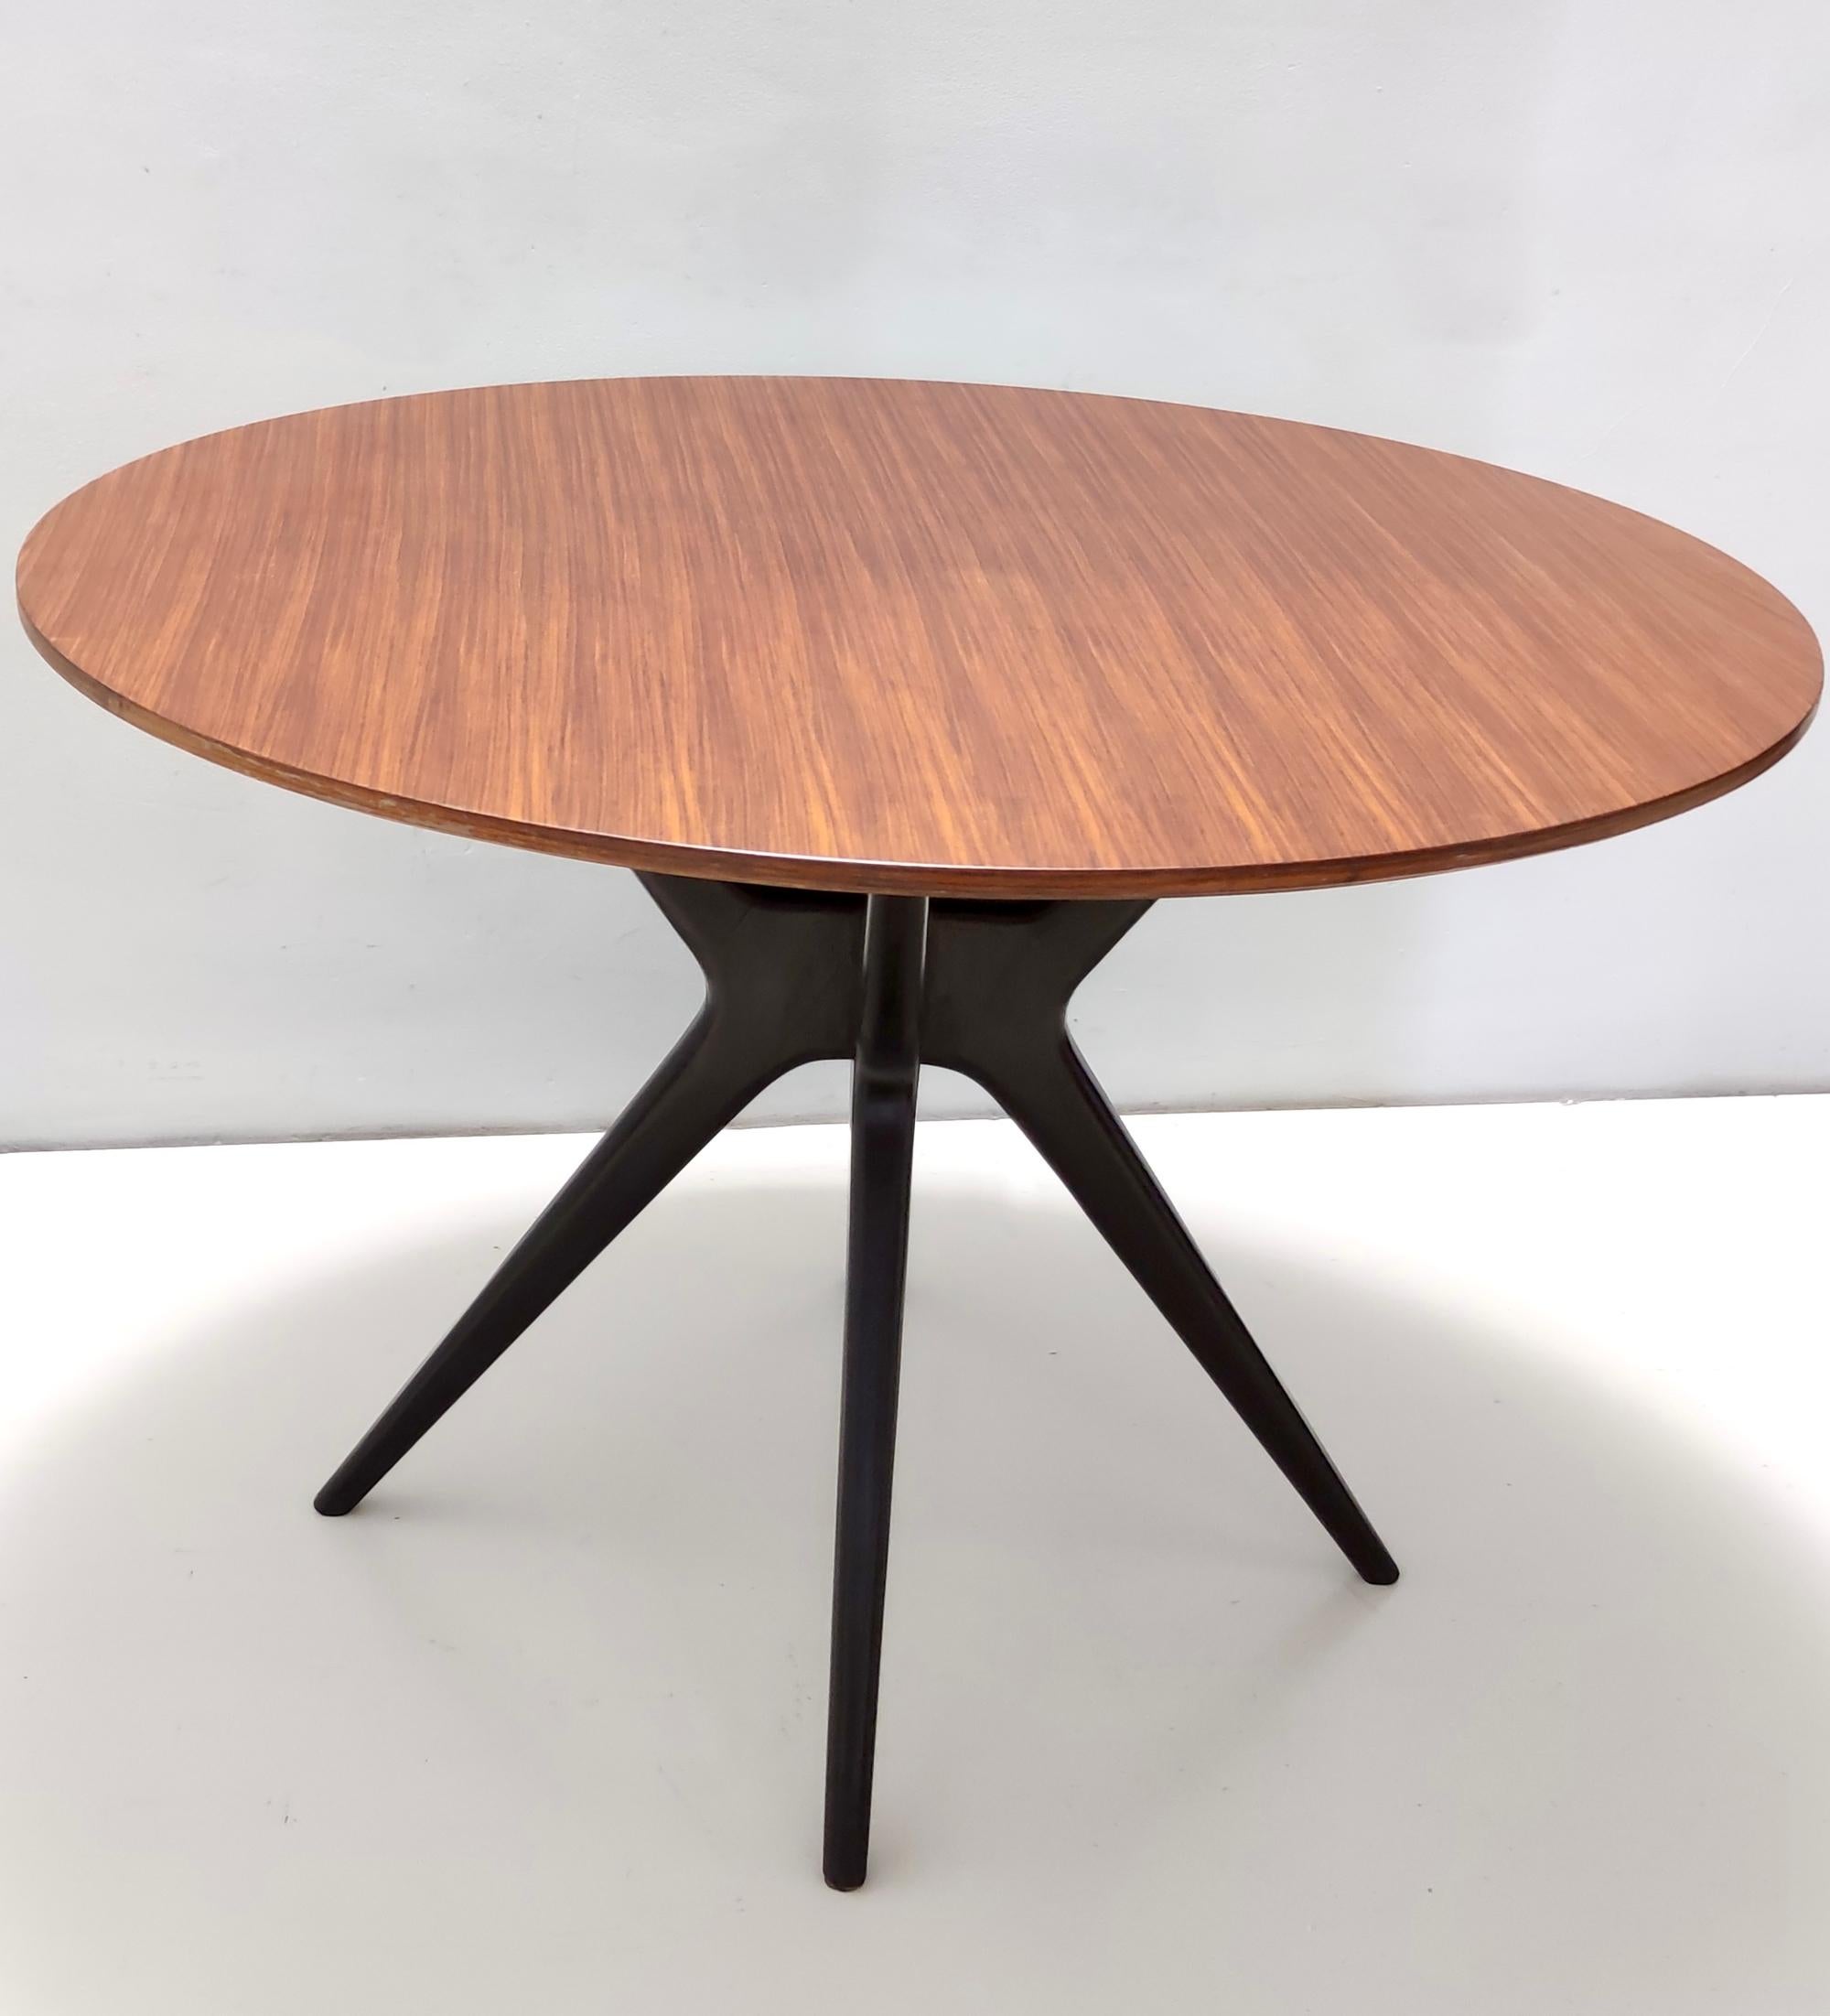 Mid-20th Century Round Ebonized Walnut and Beech Dining Table in the style of Ico Parisi, Italy